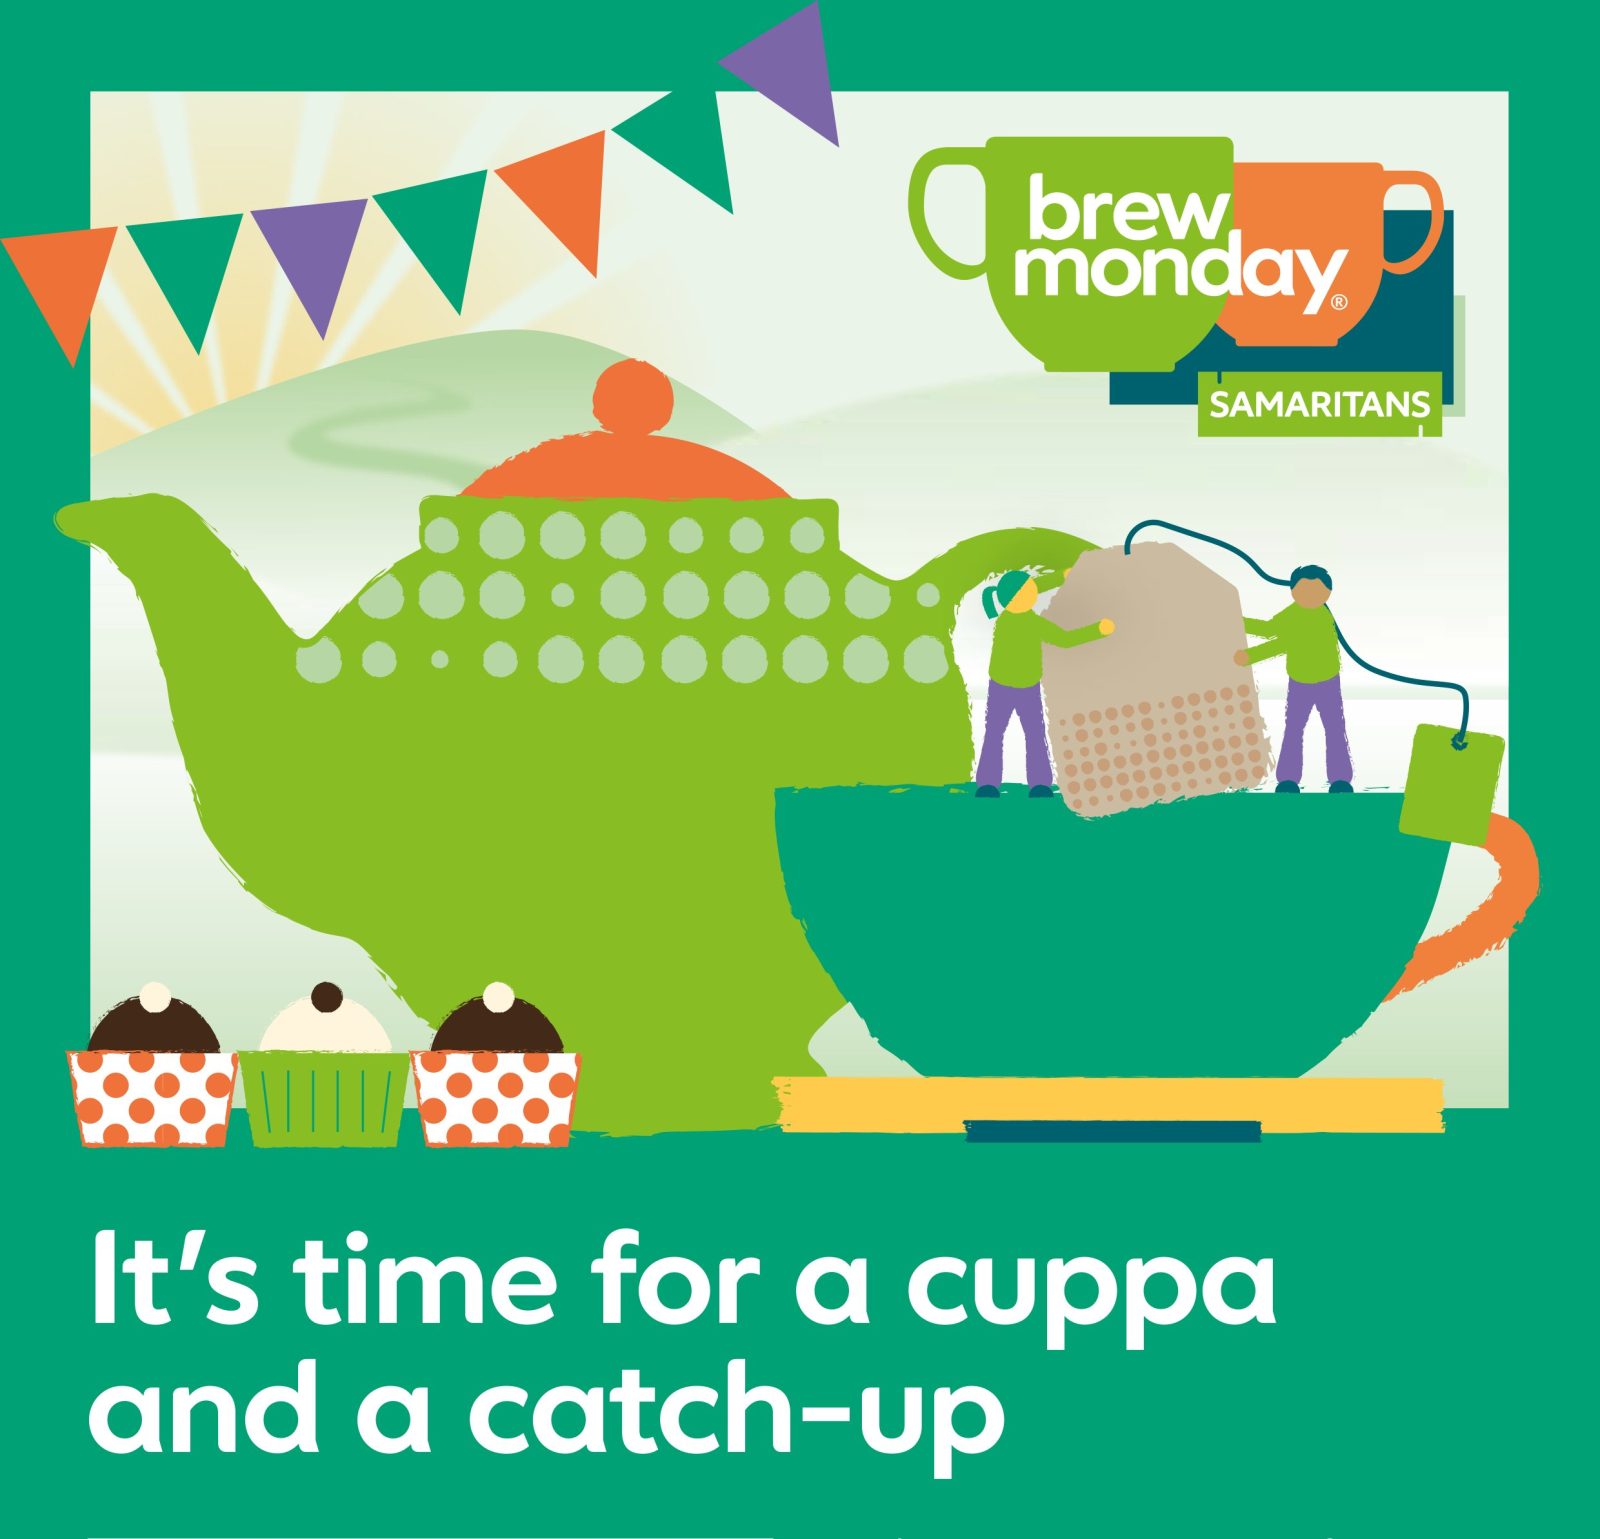 Samaritans is encouraging Mancs to reach out for &#8216;a cuppa and a catch-up&#8217; this Blue Monday, The Manc